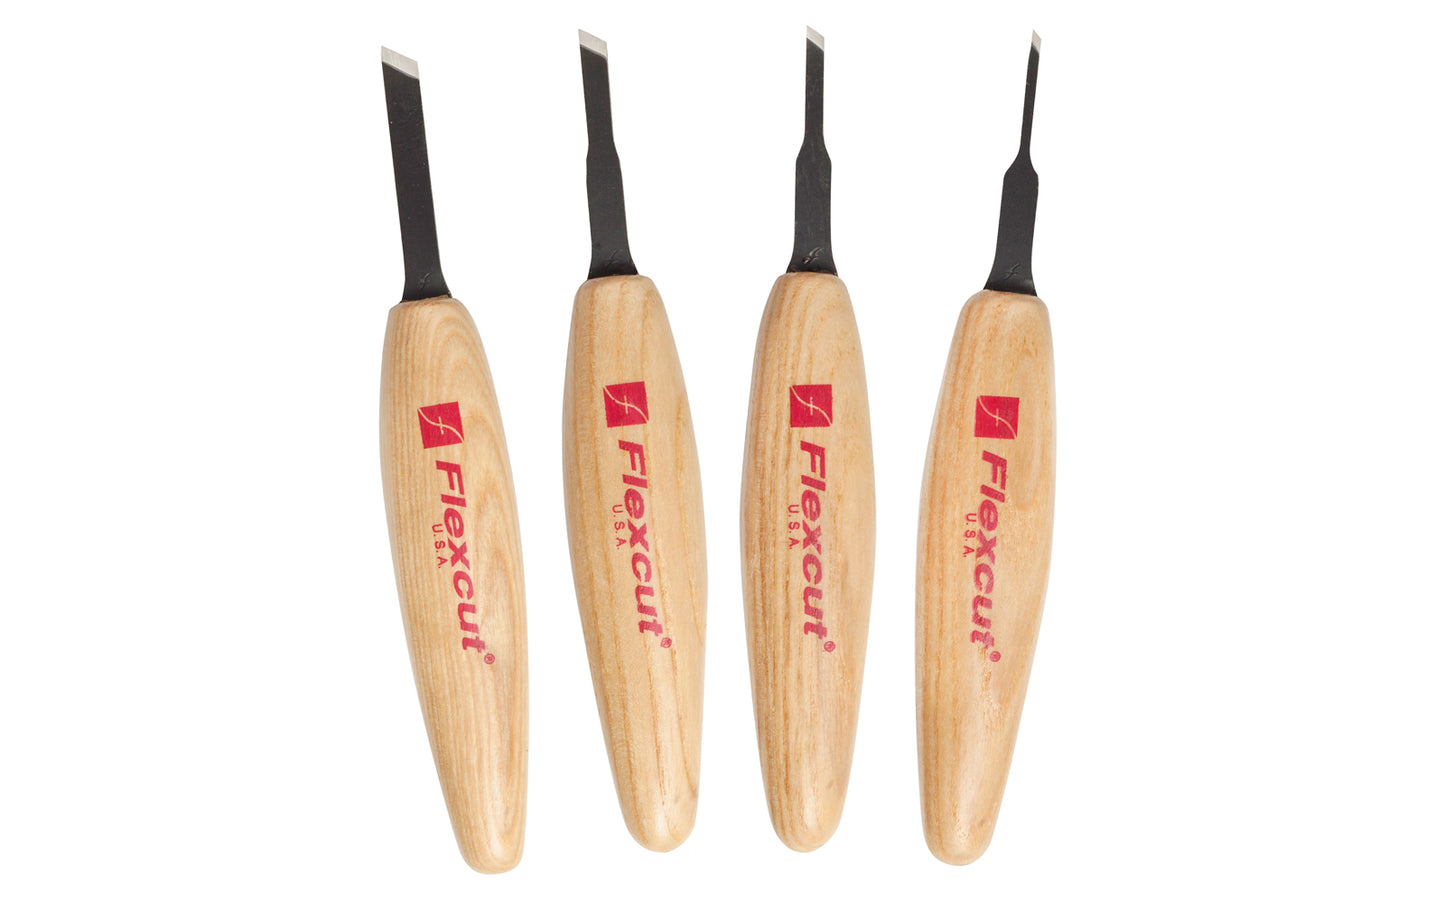 Flexcut Skew Micro Tool Carving Set ~ MT200 - Made in USA ~ 4-piece Set ~ Blades are made of High Carbon Spring Steel, Tempered to HRC 59-61. The cutting edges are hand honed & polished ~ Micro Chisels ~ Set includes 1/16" (1.5mm) - 1/8" (3mm) - 3/16" (5mm) - 1/4" (6mm) Skews - Excellent for miniature & extra fine detail carving work ~ 651646302005